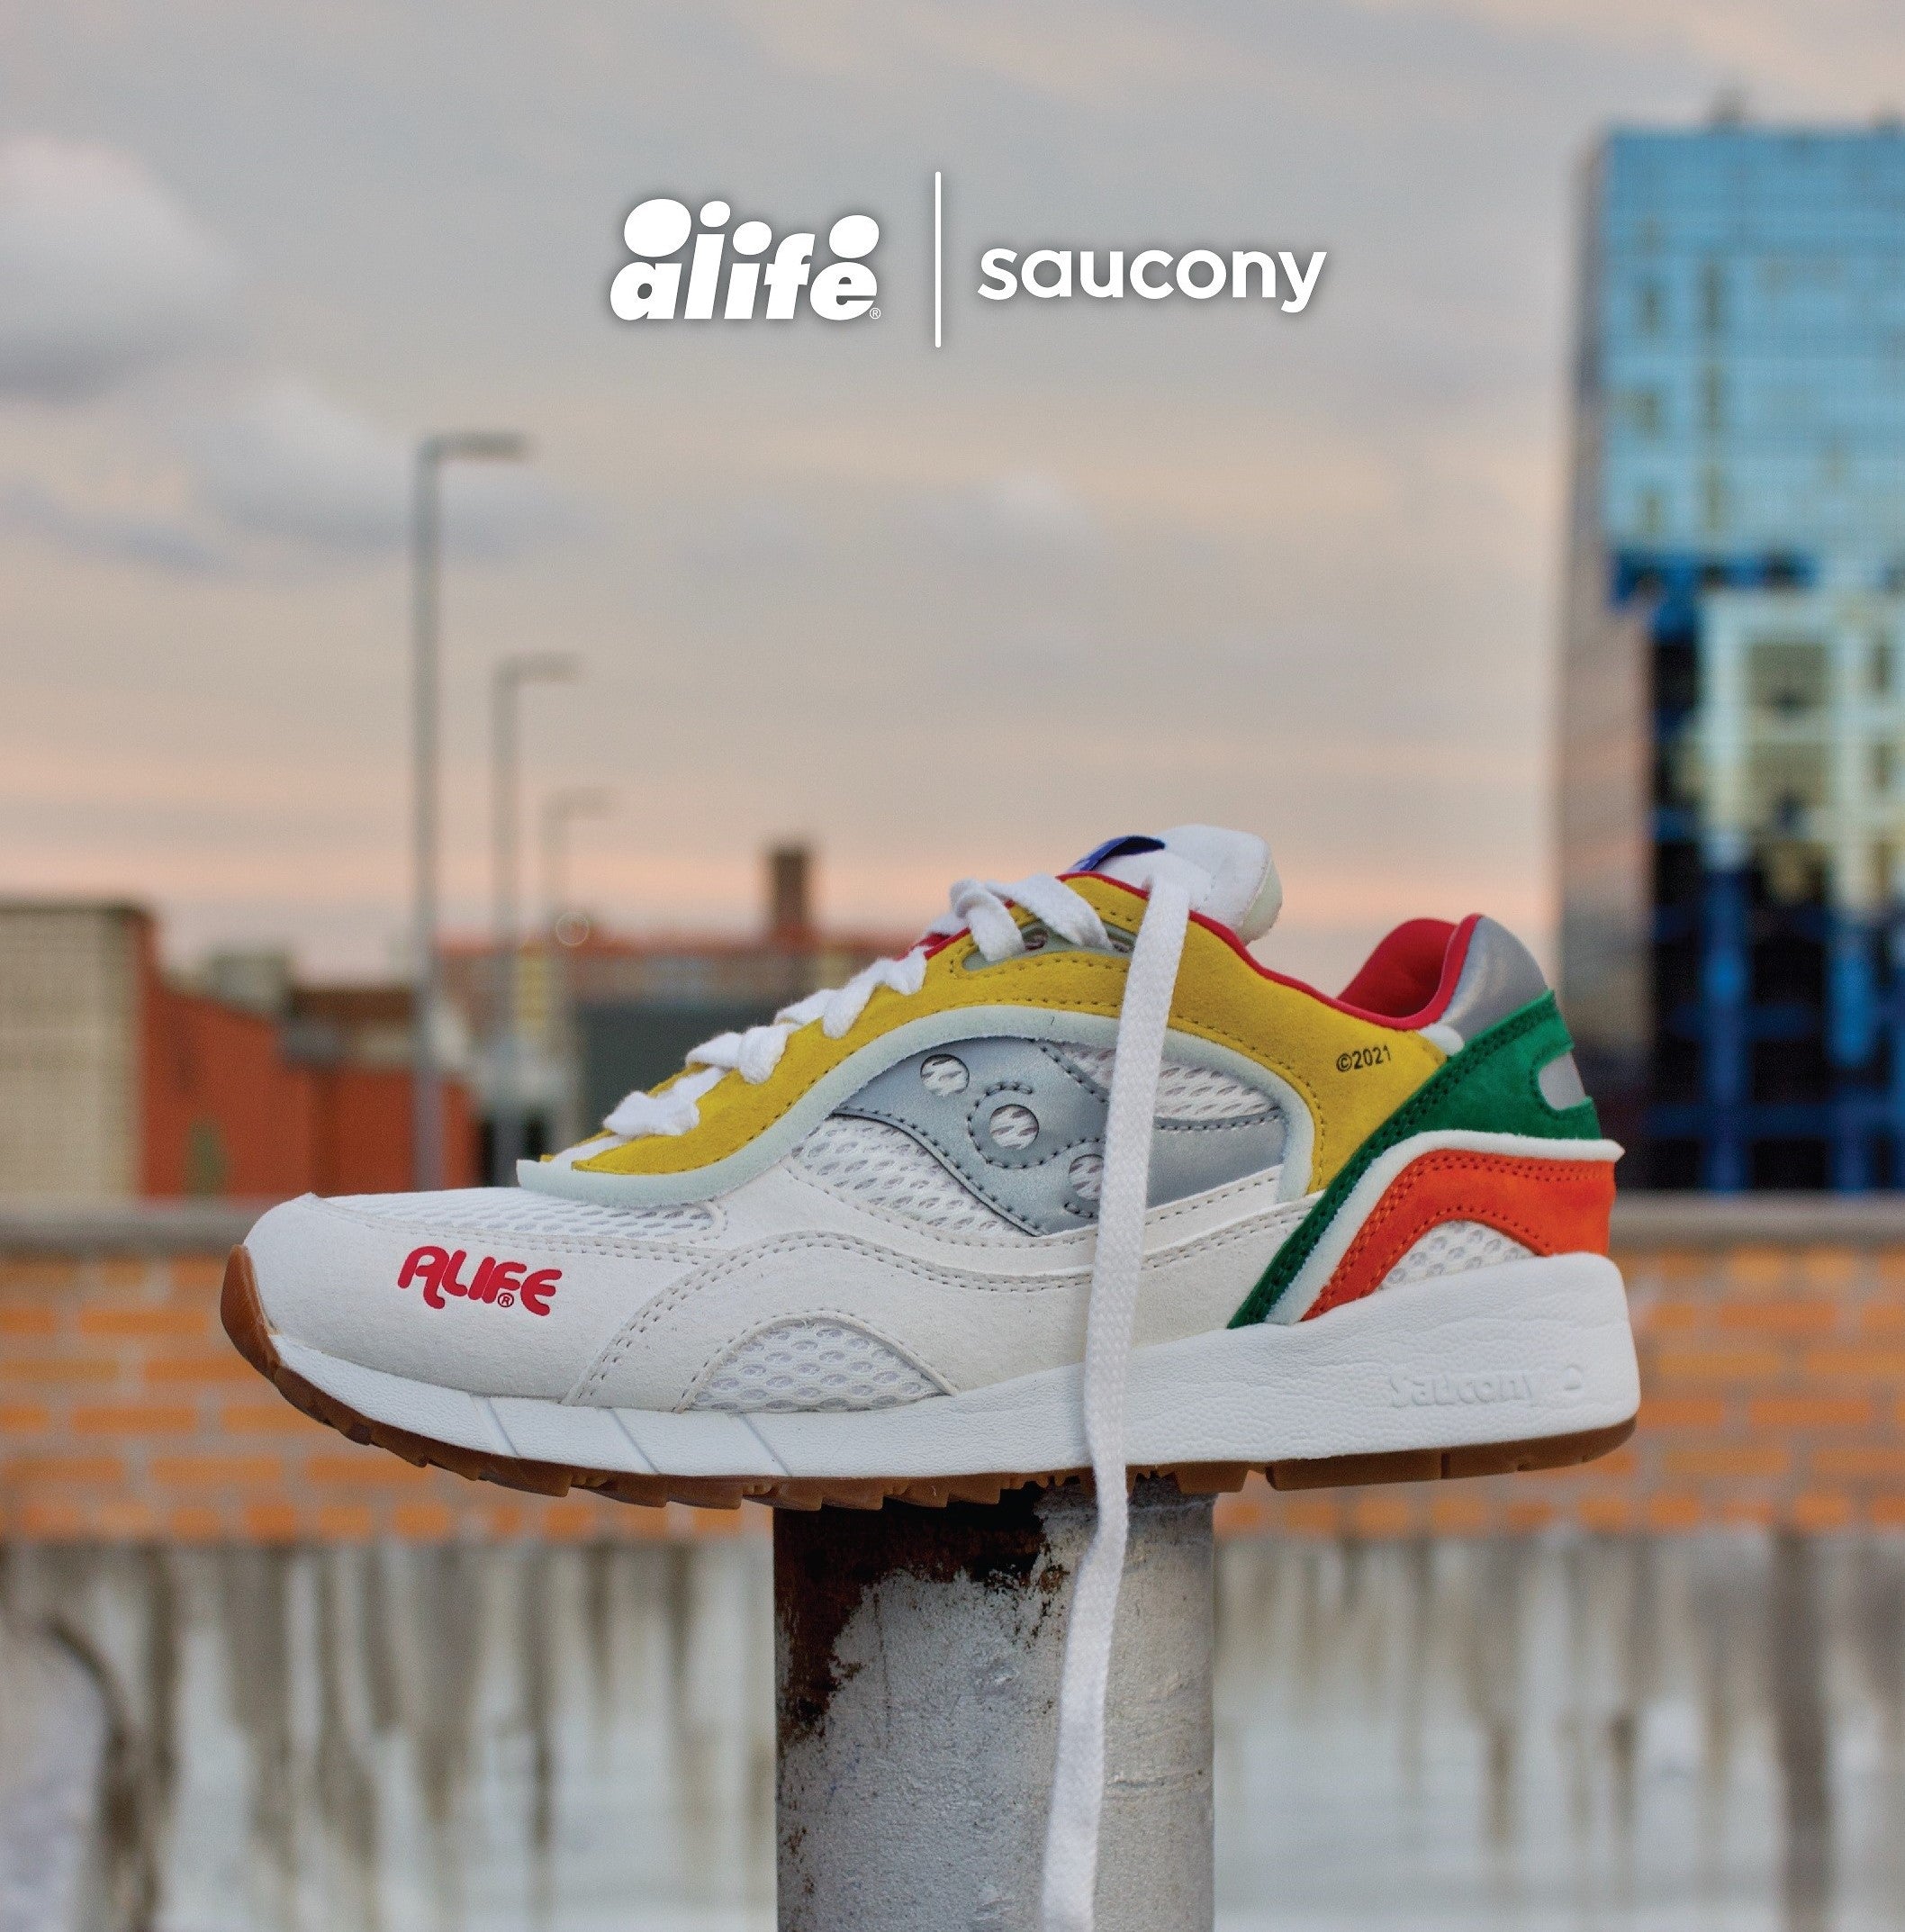 Alife - classic. ALIFE Saucony makes Shadow x 6000 a